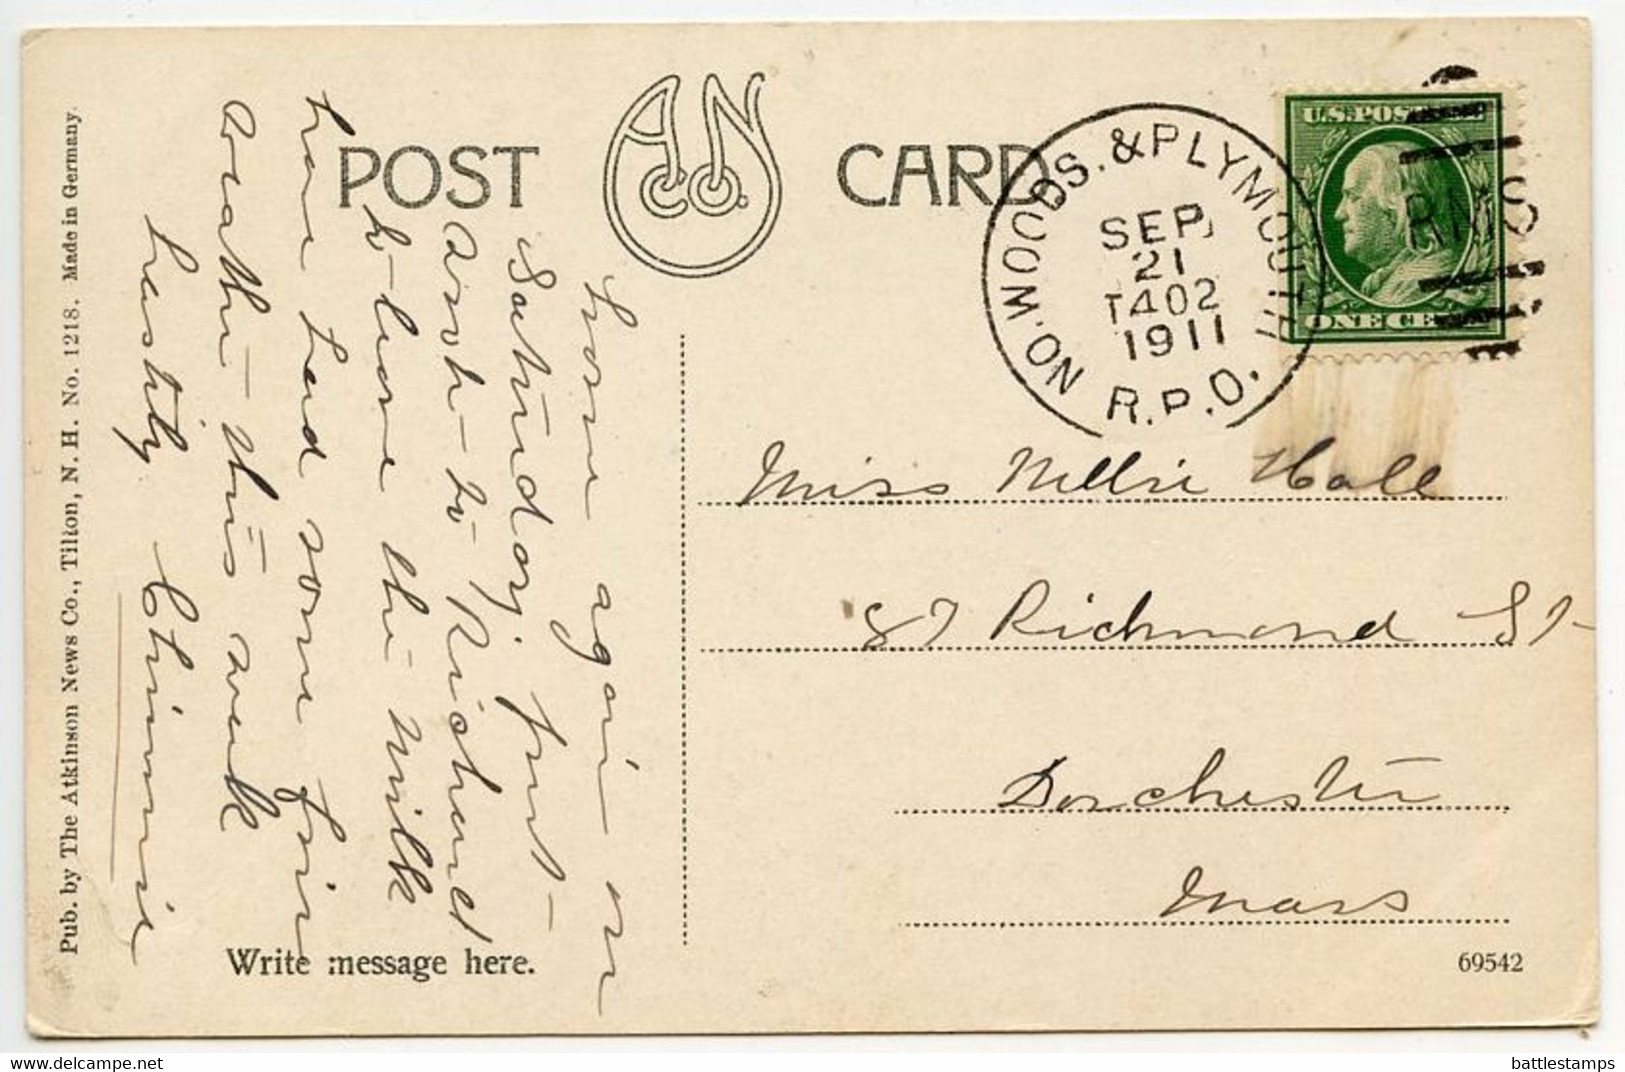 United States 1911 Postcard Dixville Notch, New Hampshire - Lake Gloriette; North Woods & Plymouth RPO Postmark - White Mountains